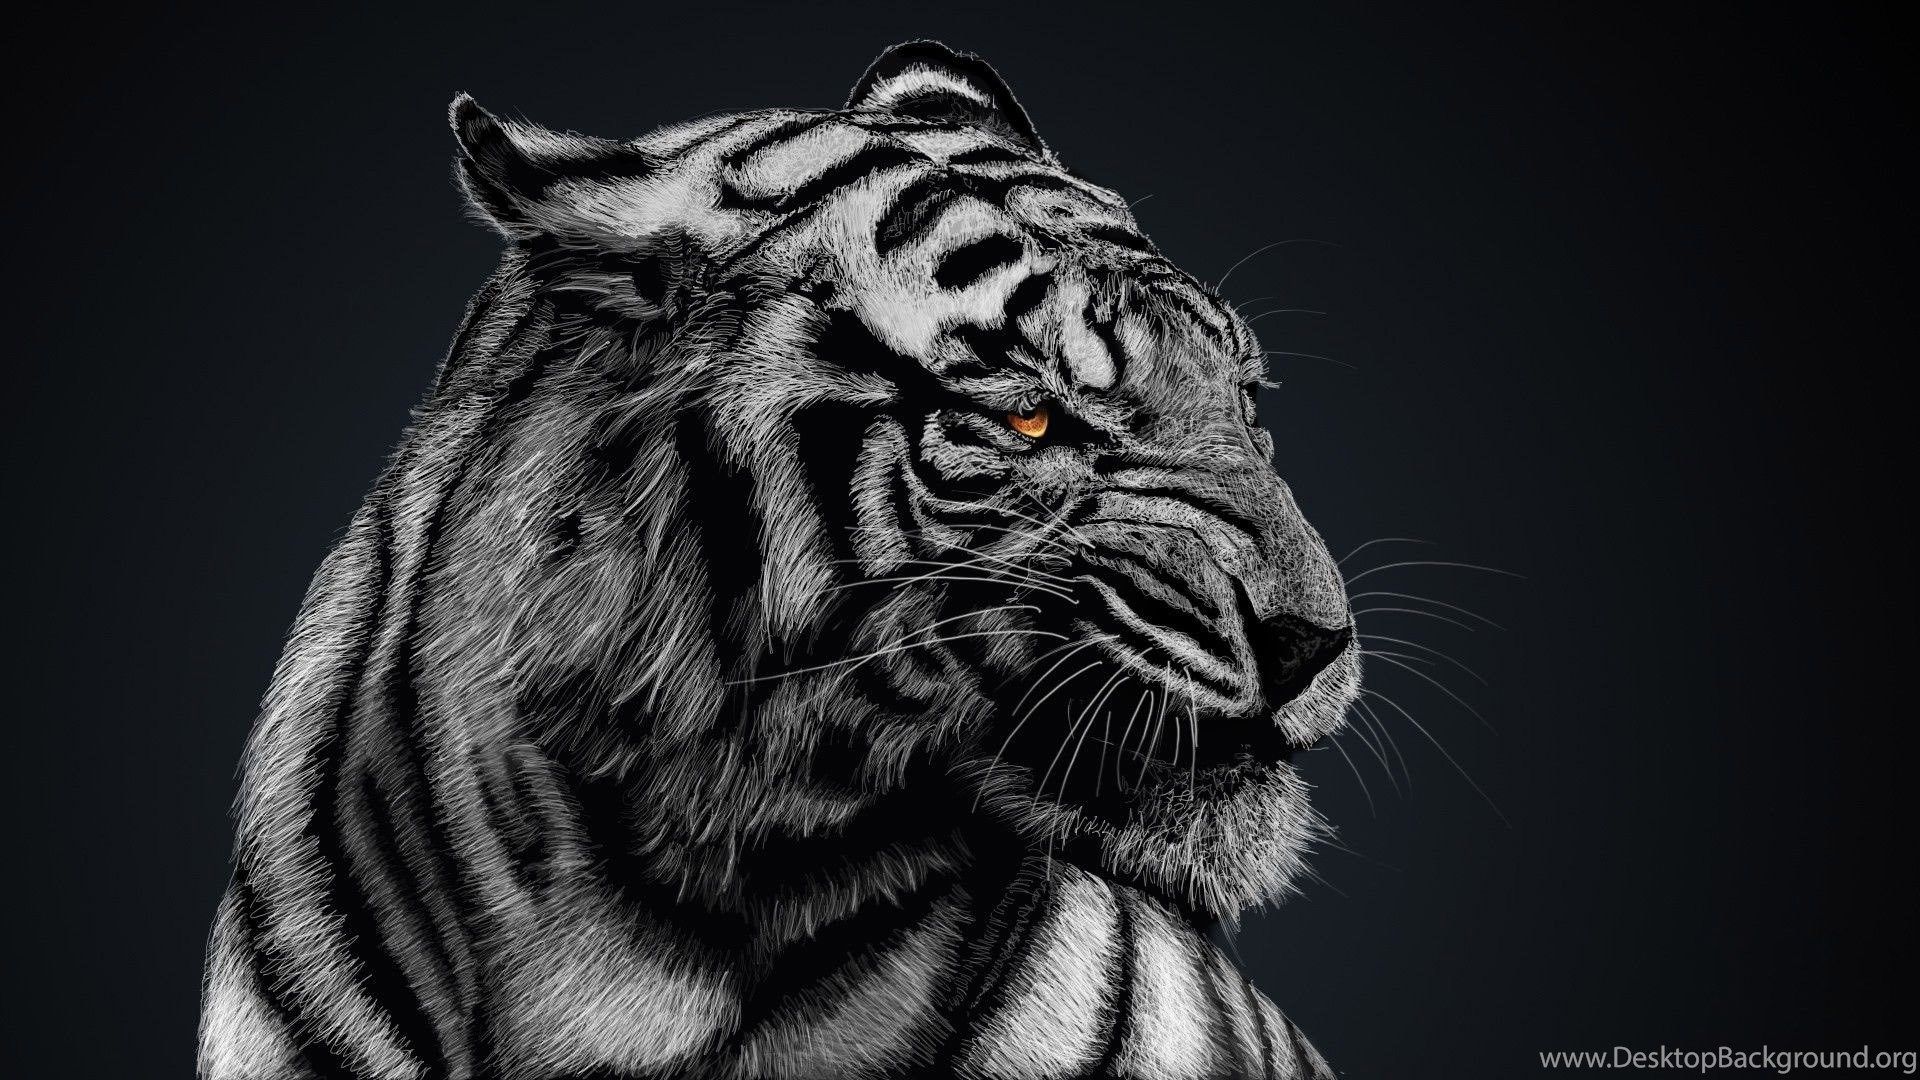 Black And White Tiger Wallpaper High Quality, Animal Wallpaper